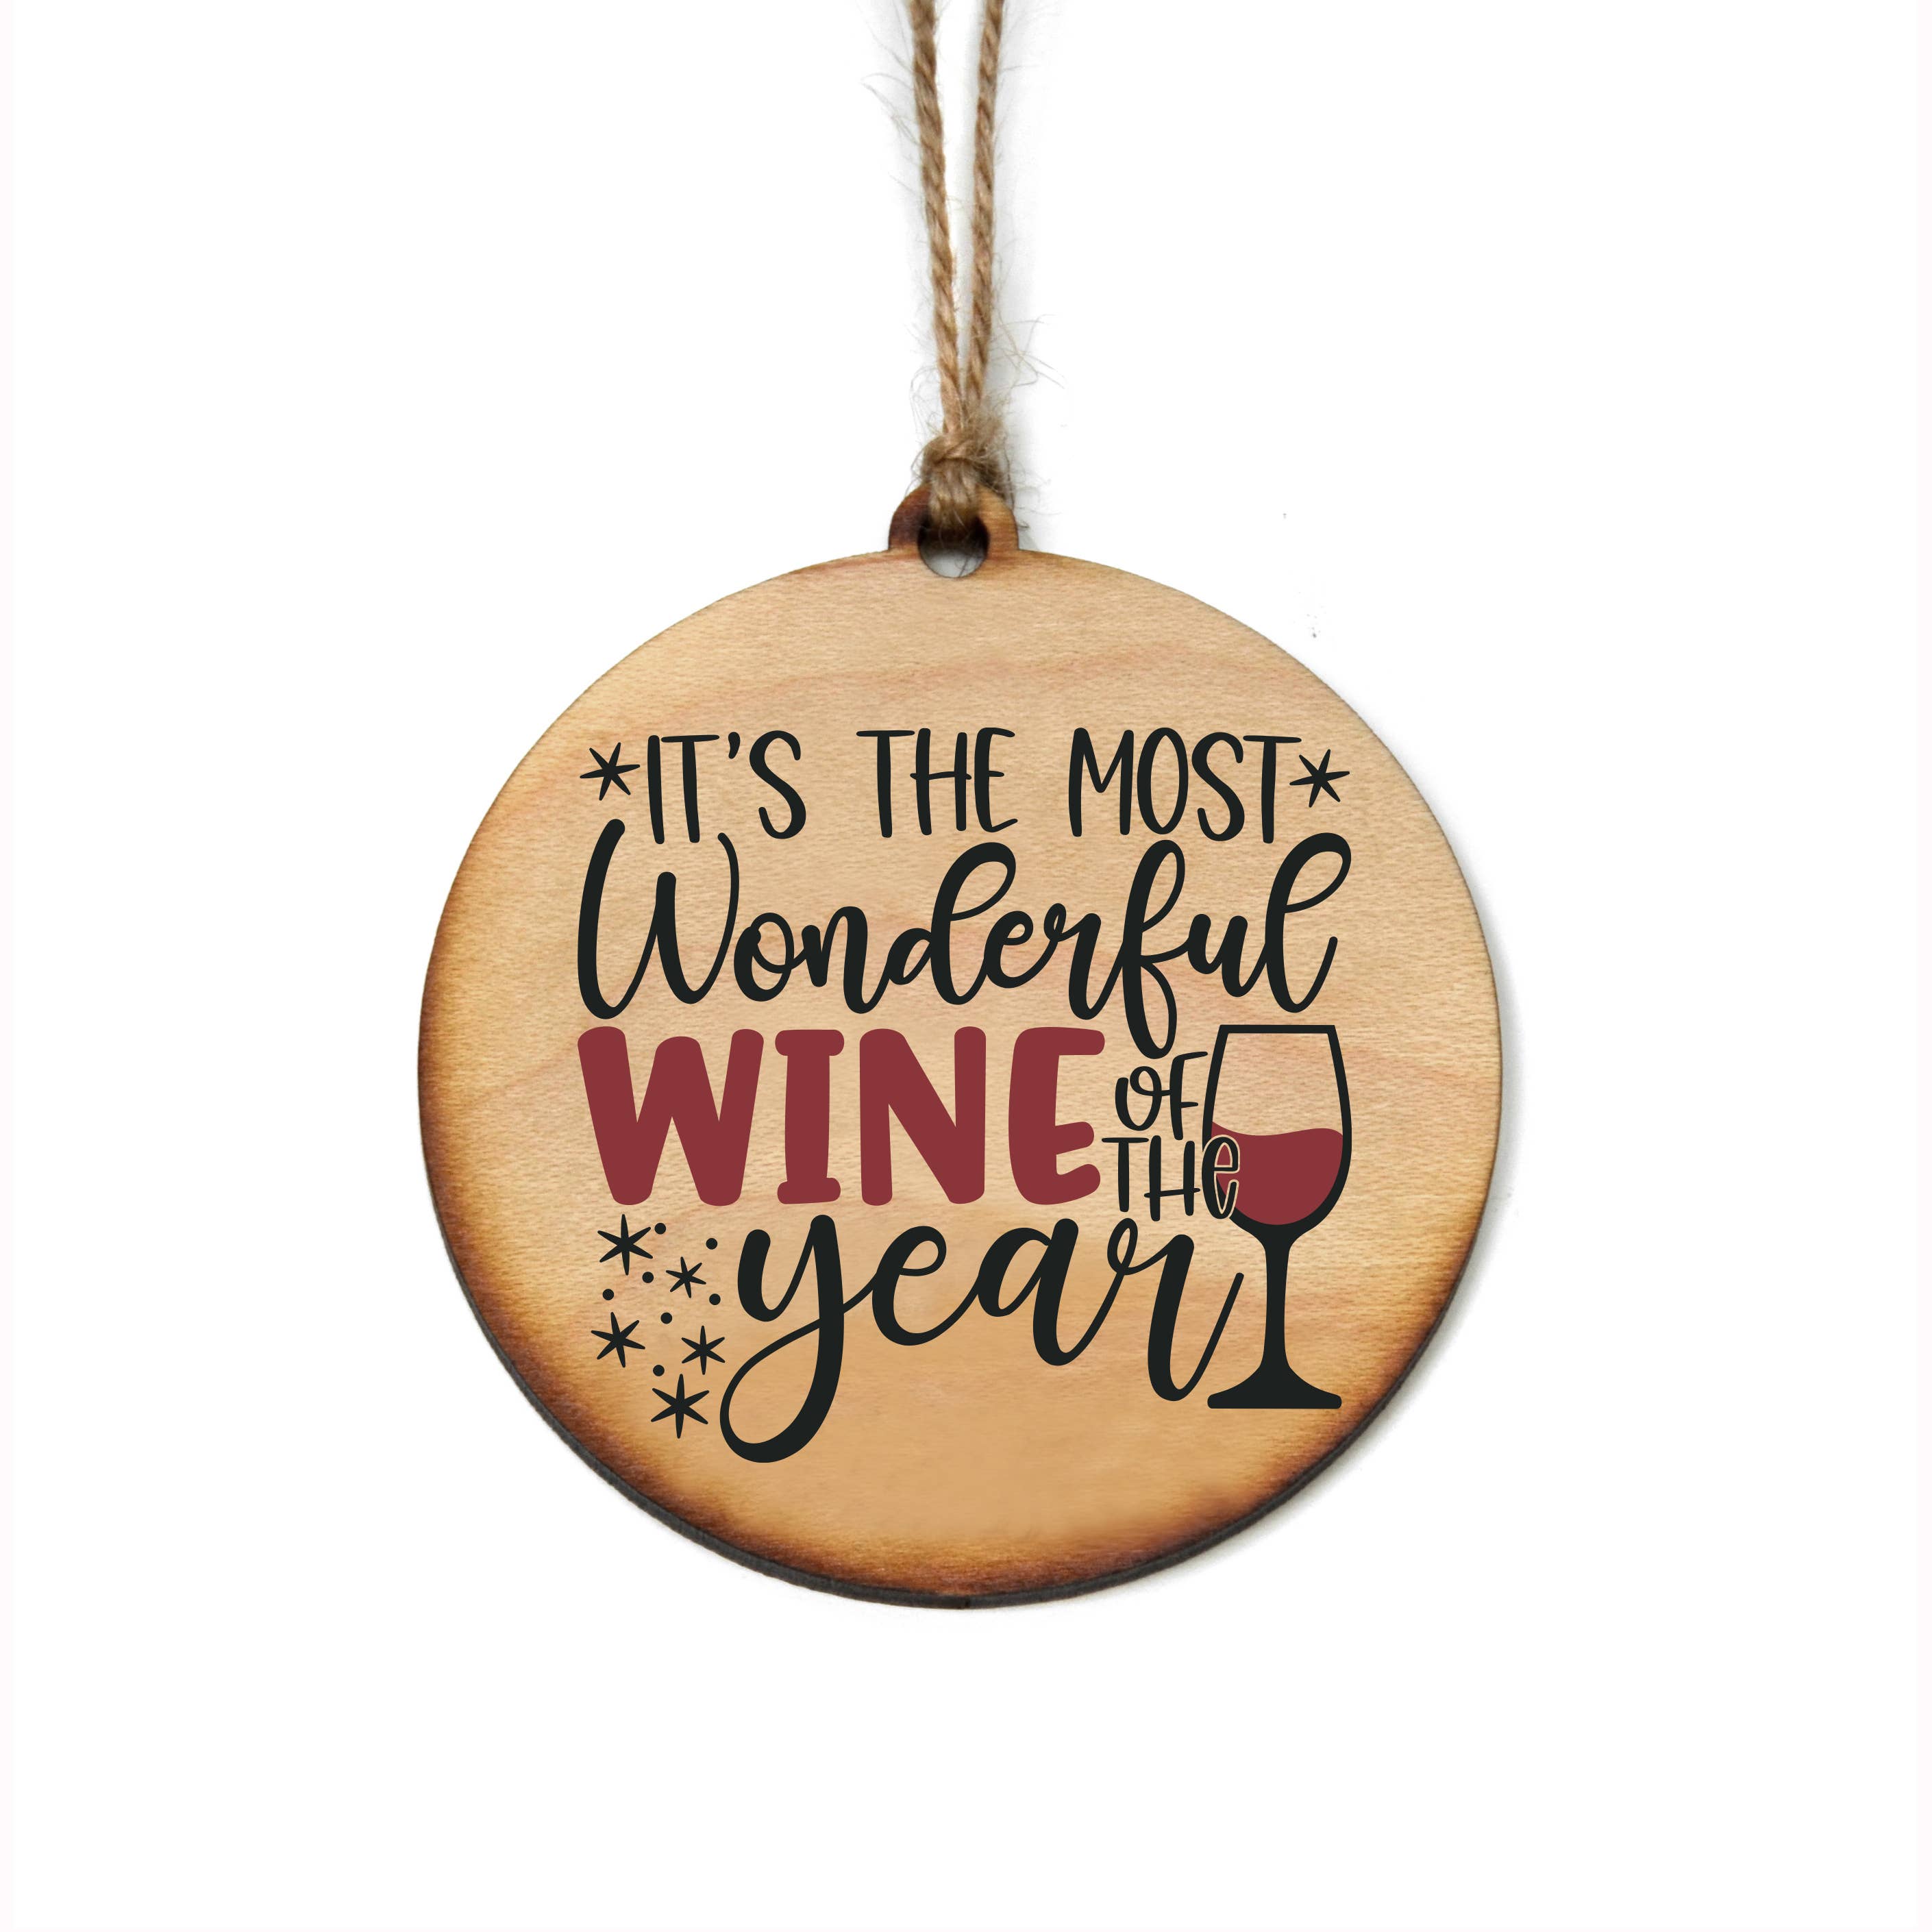 It's The Most Wonderful Wine of the Year!  -  Boozy Christmas Ornaments